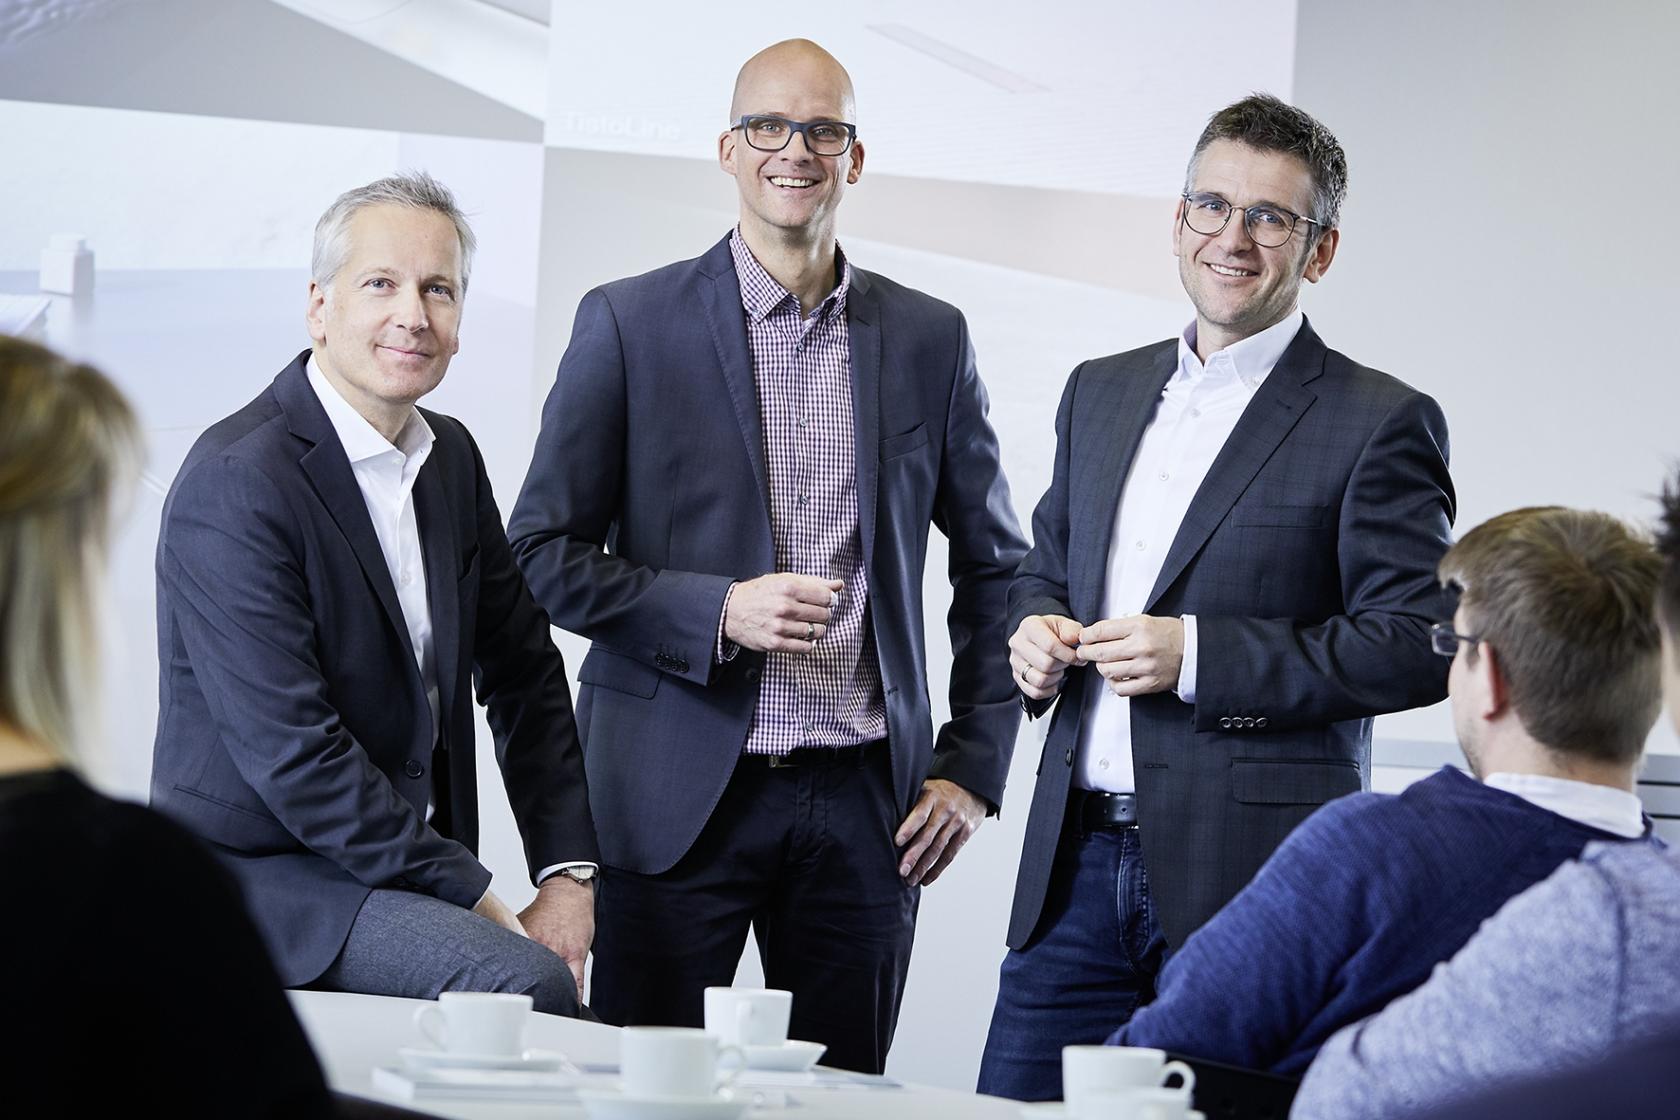 The next round of the series of seminars by the companies Dallmer, Rehau and Keuco will begin on 7 May 2019. In a total of seven events, the experts will give tips on the topic of bathrooms. 